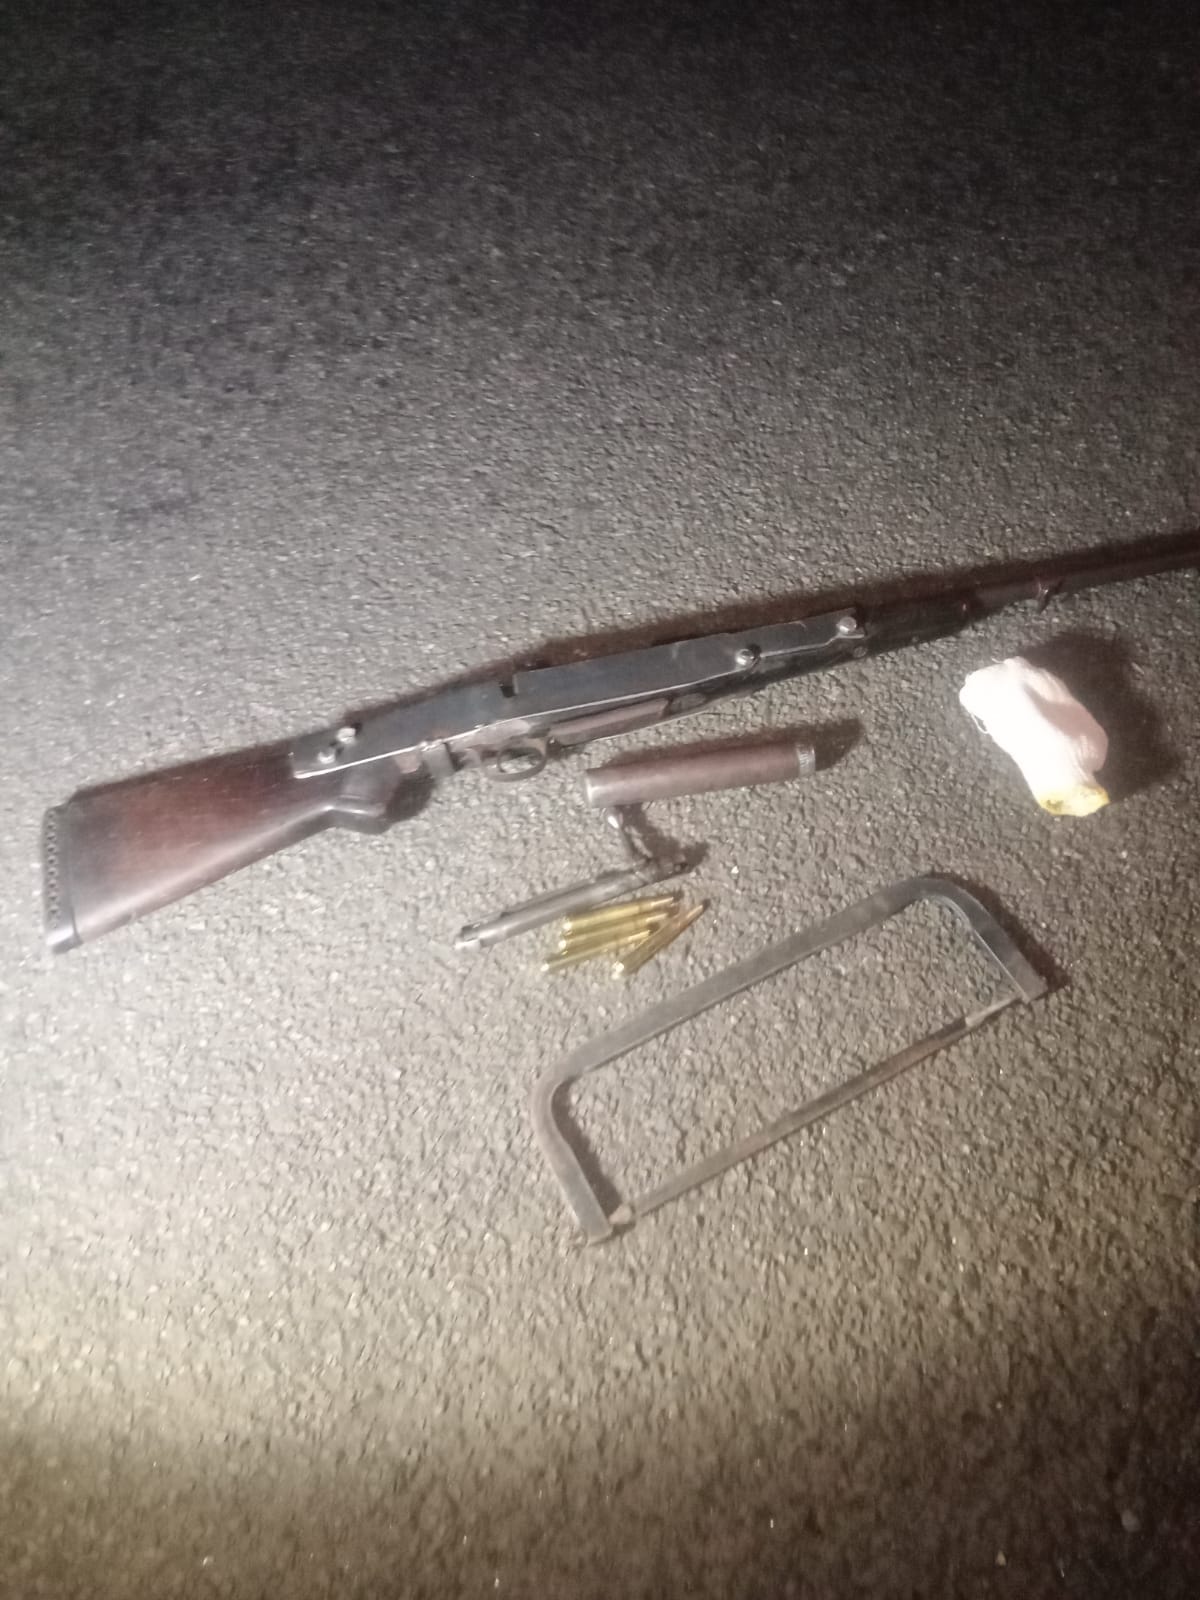 Suspects arrested for unlawful possession of firearm and ammunition